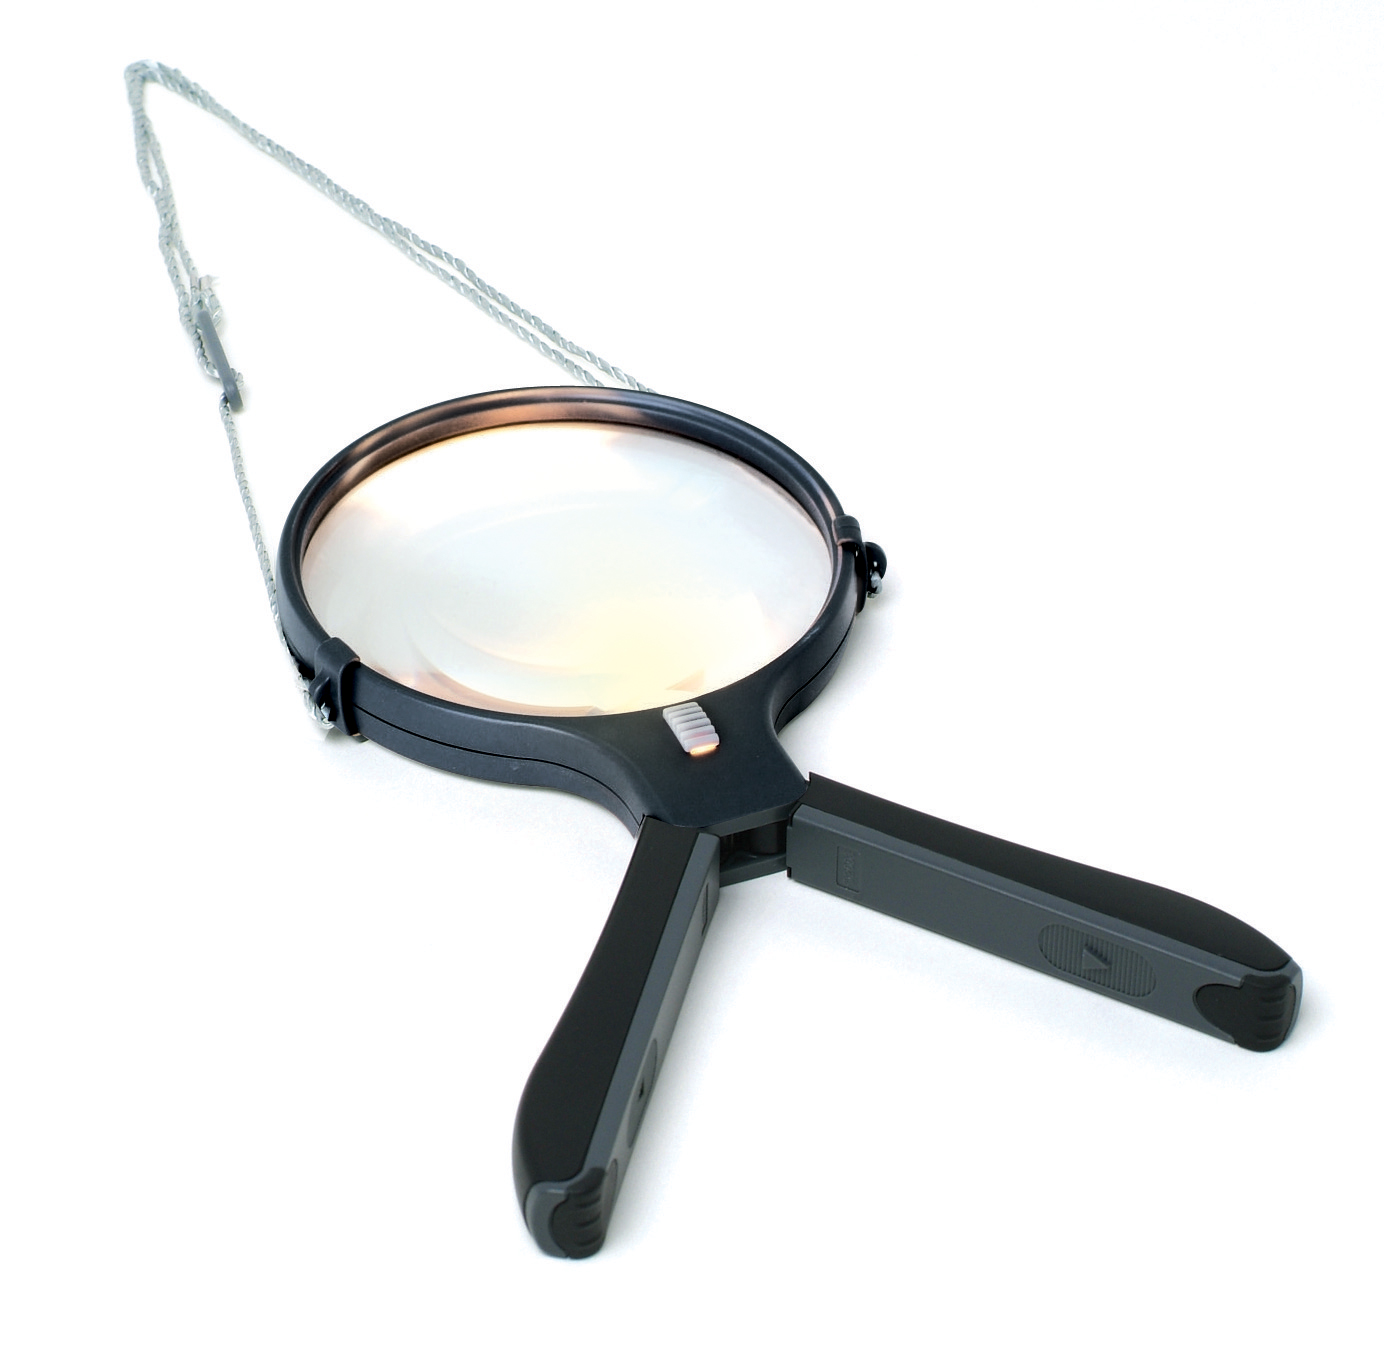 Deluxe 2-Way Hands Free Magnifier with Light 2